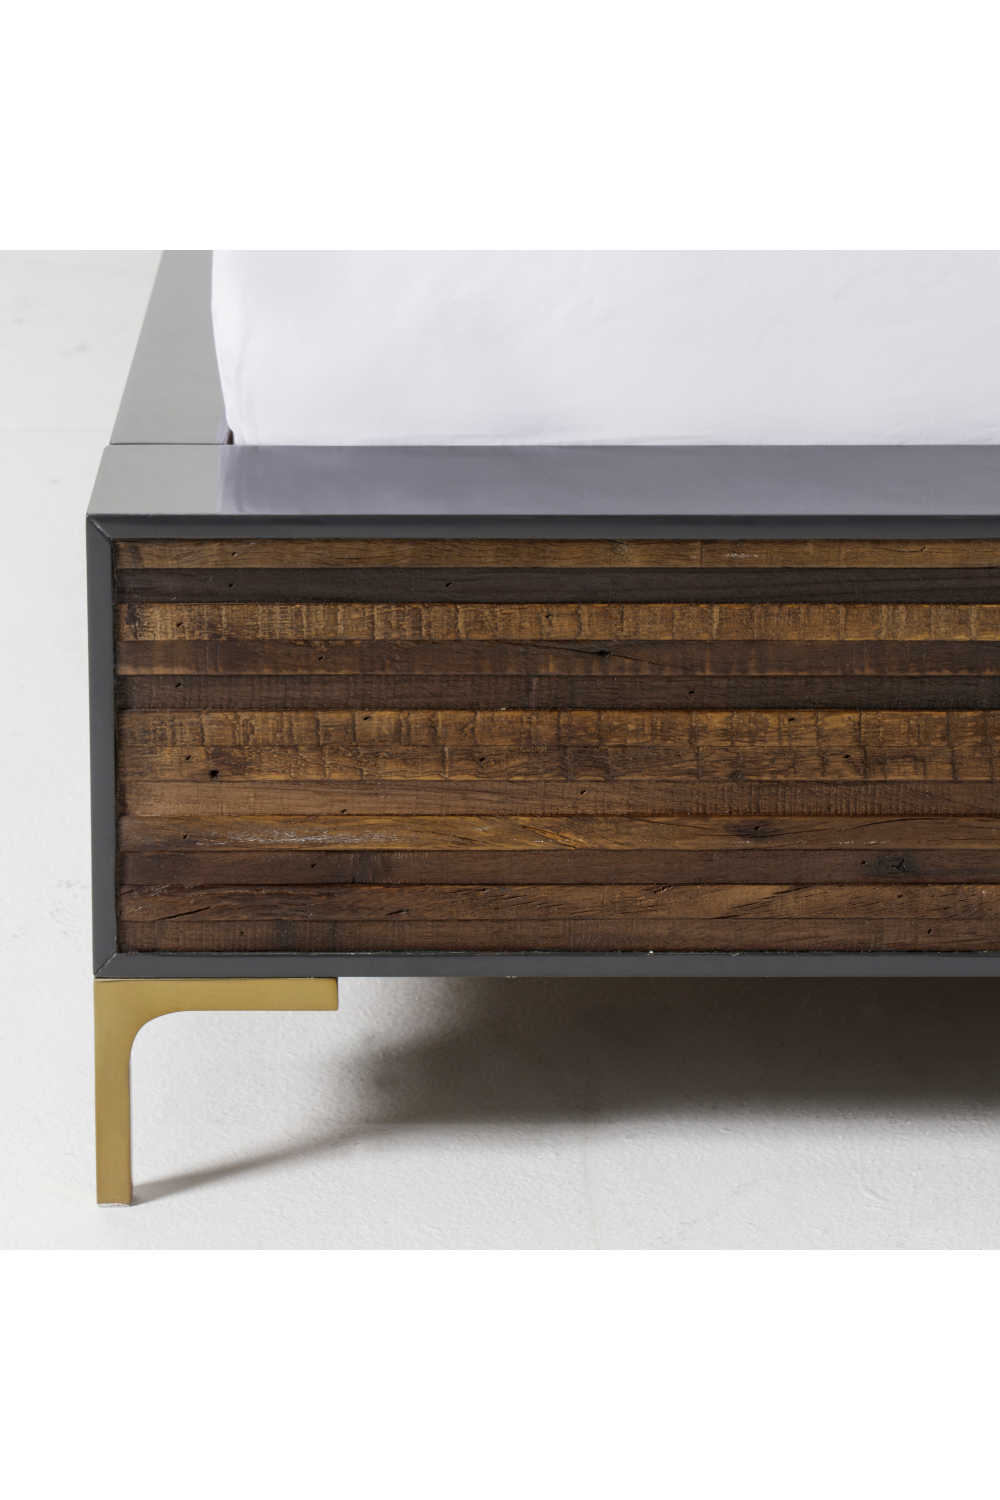 Weathered Peroba Queen Bed | Andrew Martin Zuma | OROA